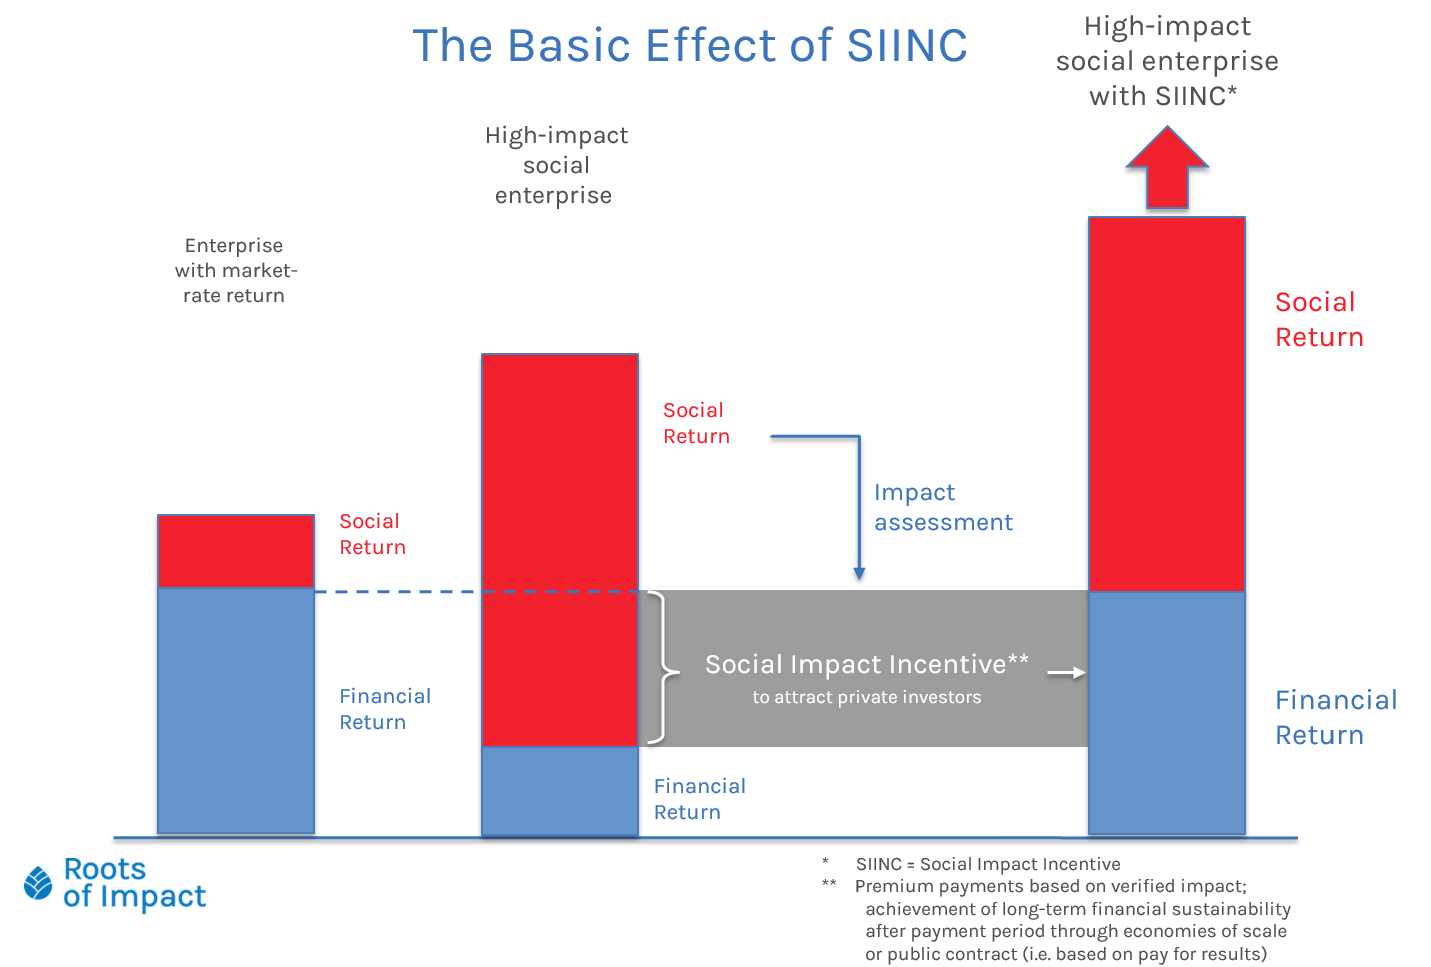 Closing the Gap with the Social Impact Incentive (SIINC). Source: ROOTS OF IMPACT (2016)